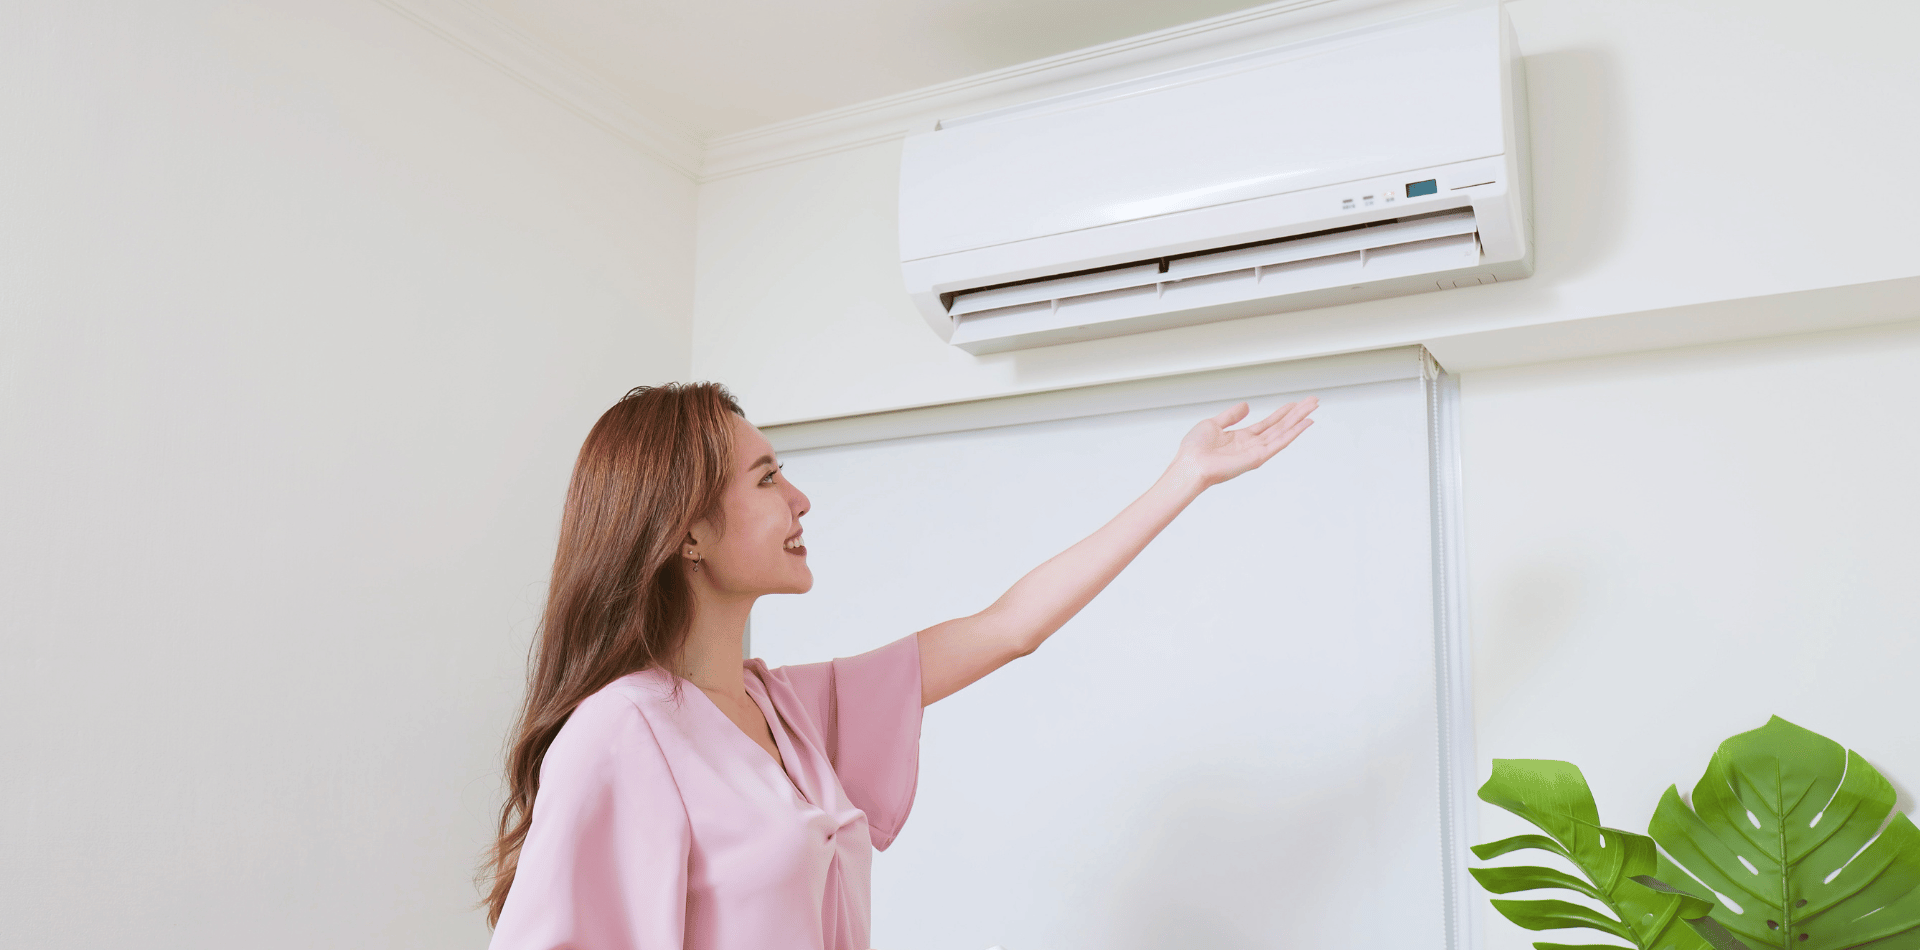 A woman controlling an air conditioner